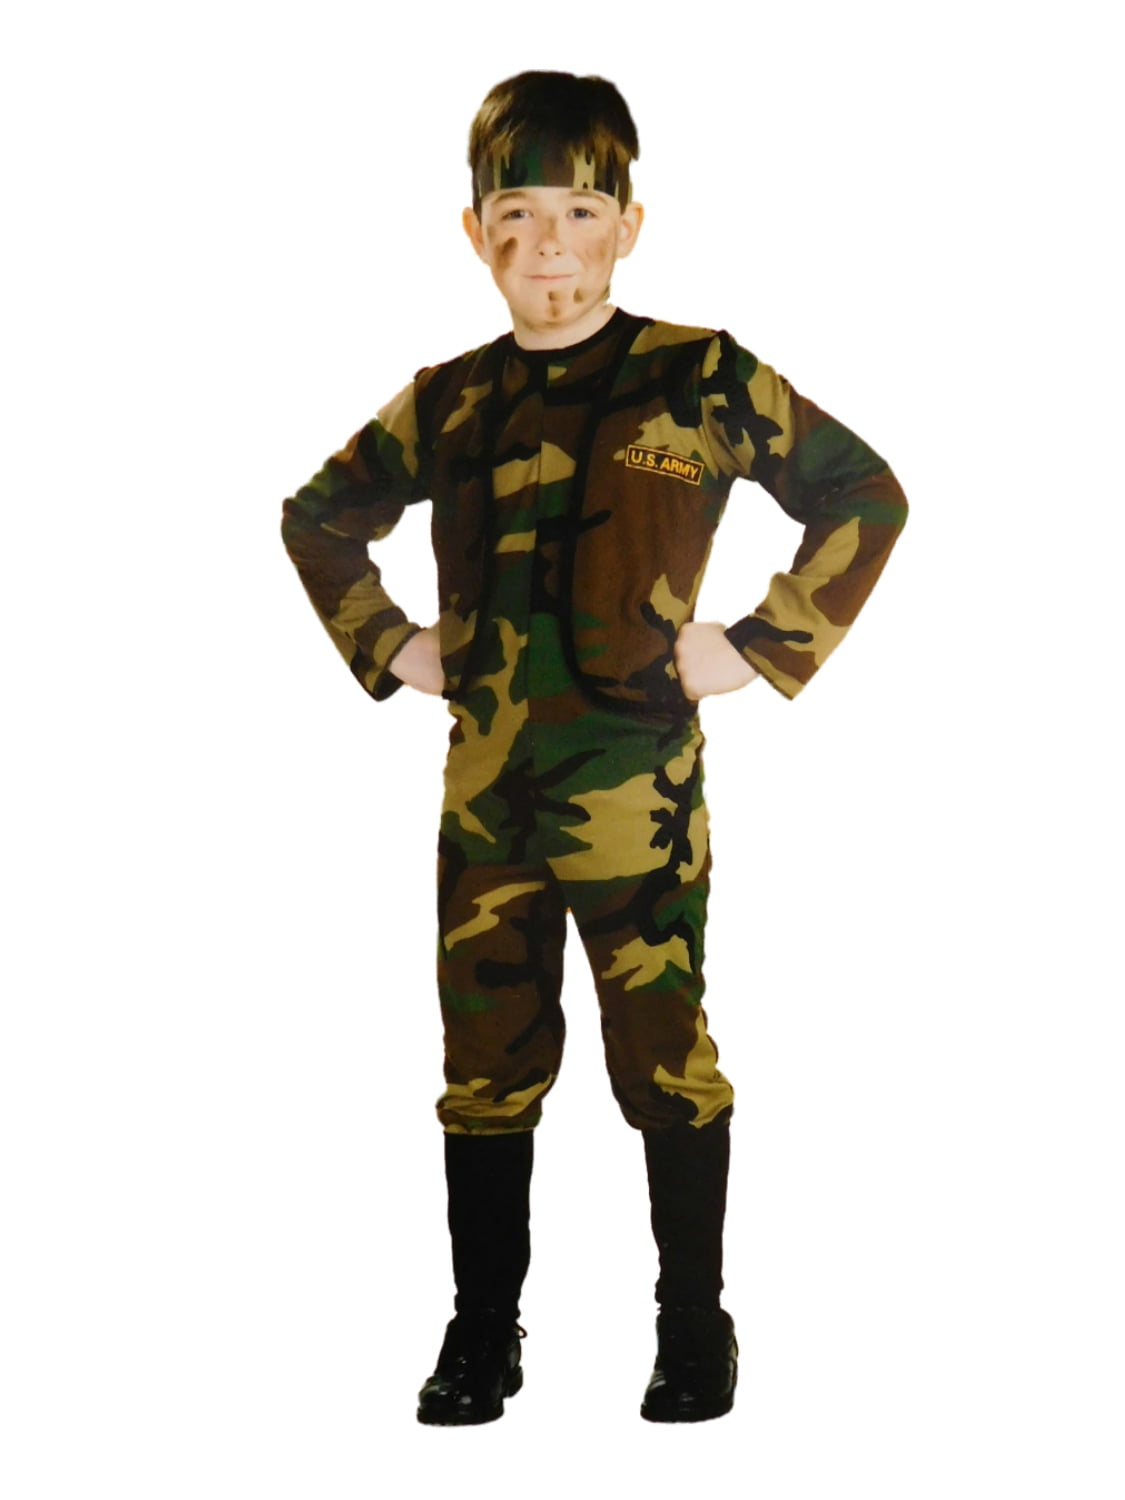 ARMY SOLDIER FANCY DRESS OUTFIT AGES 4-6 small